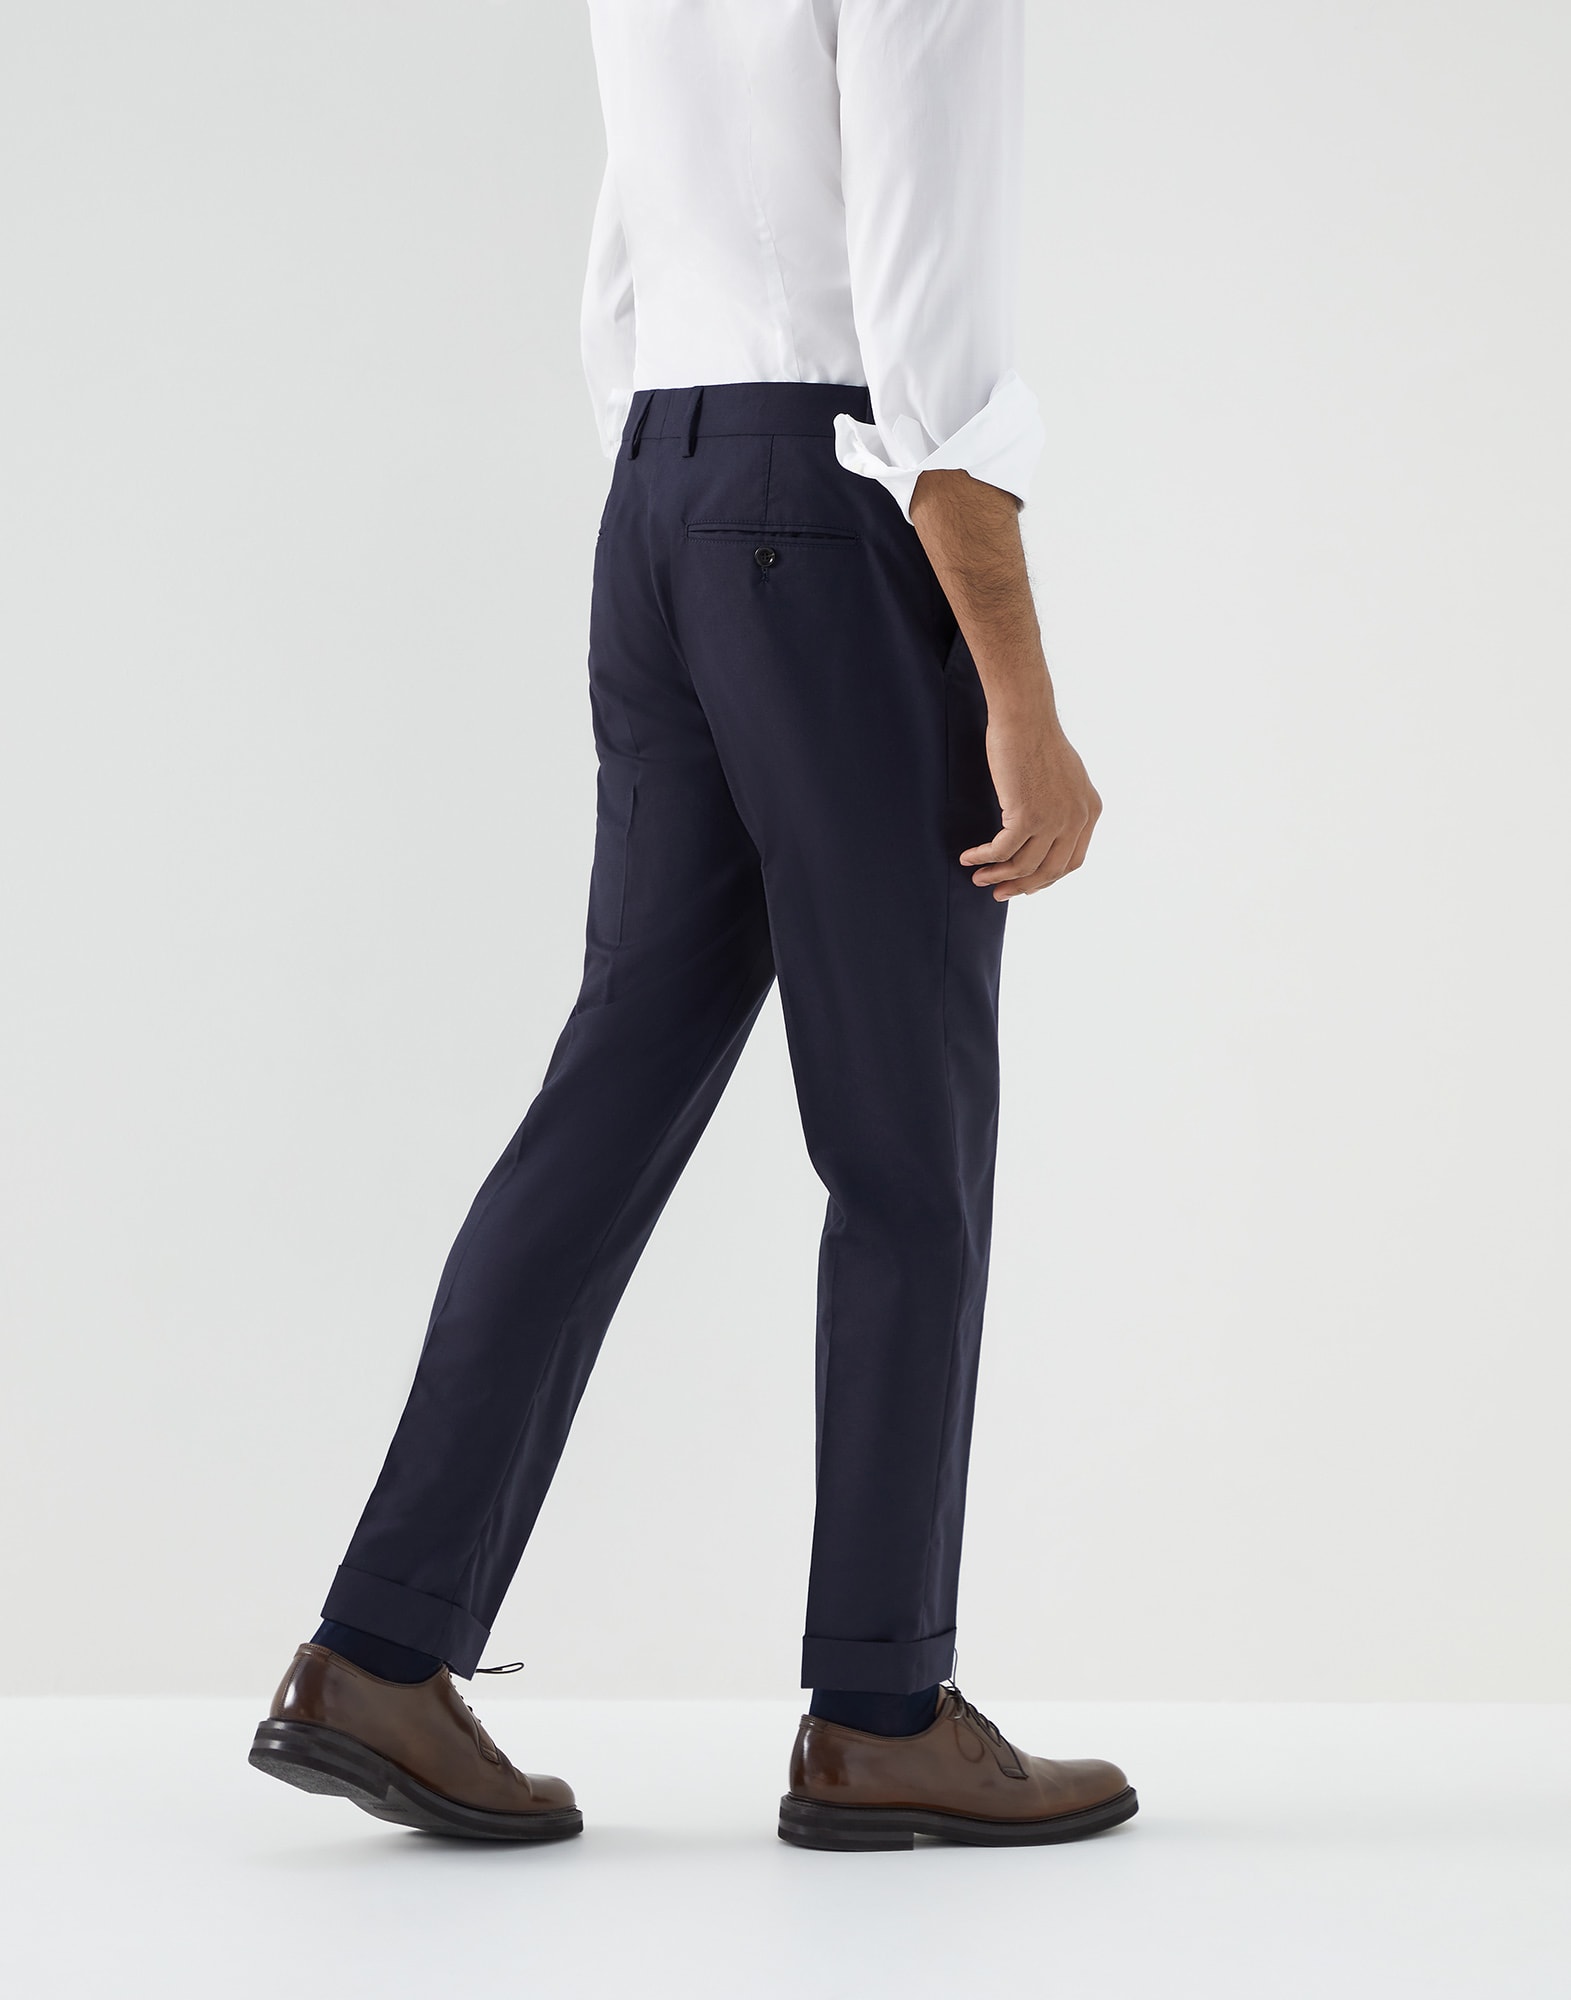 Formal fit trousers (232MD455PA0Z) for Man | Brunello Cucinelli